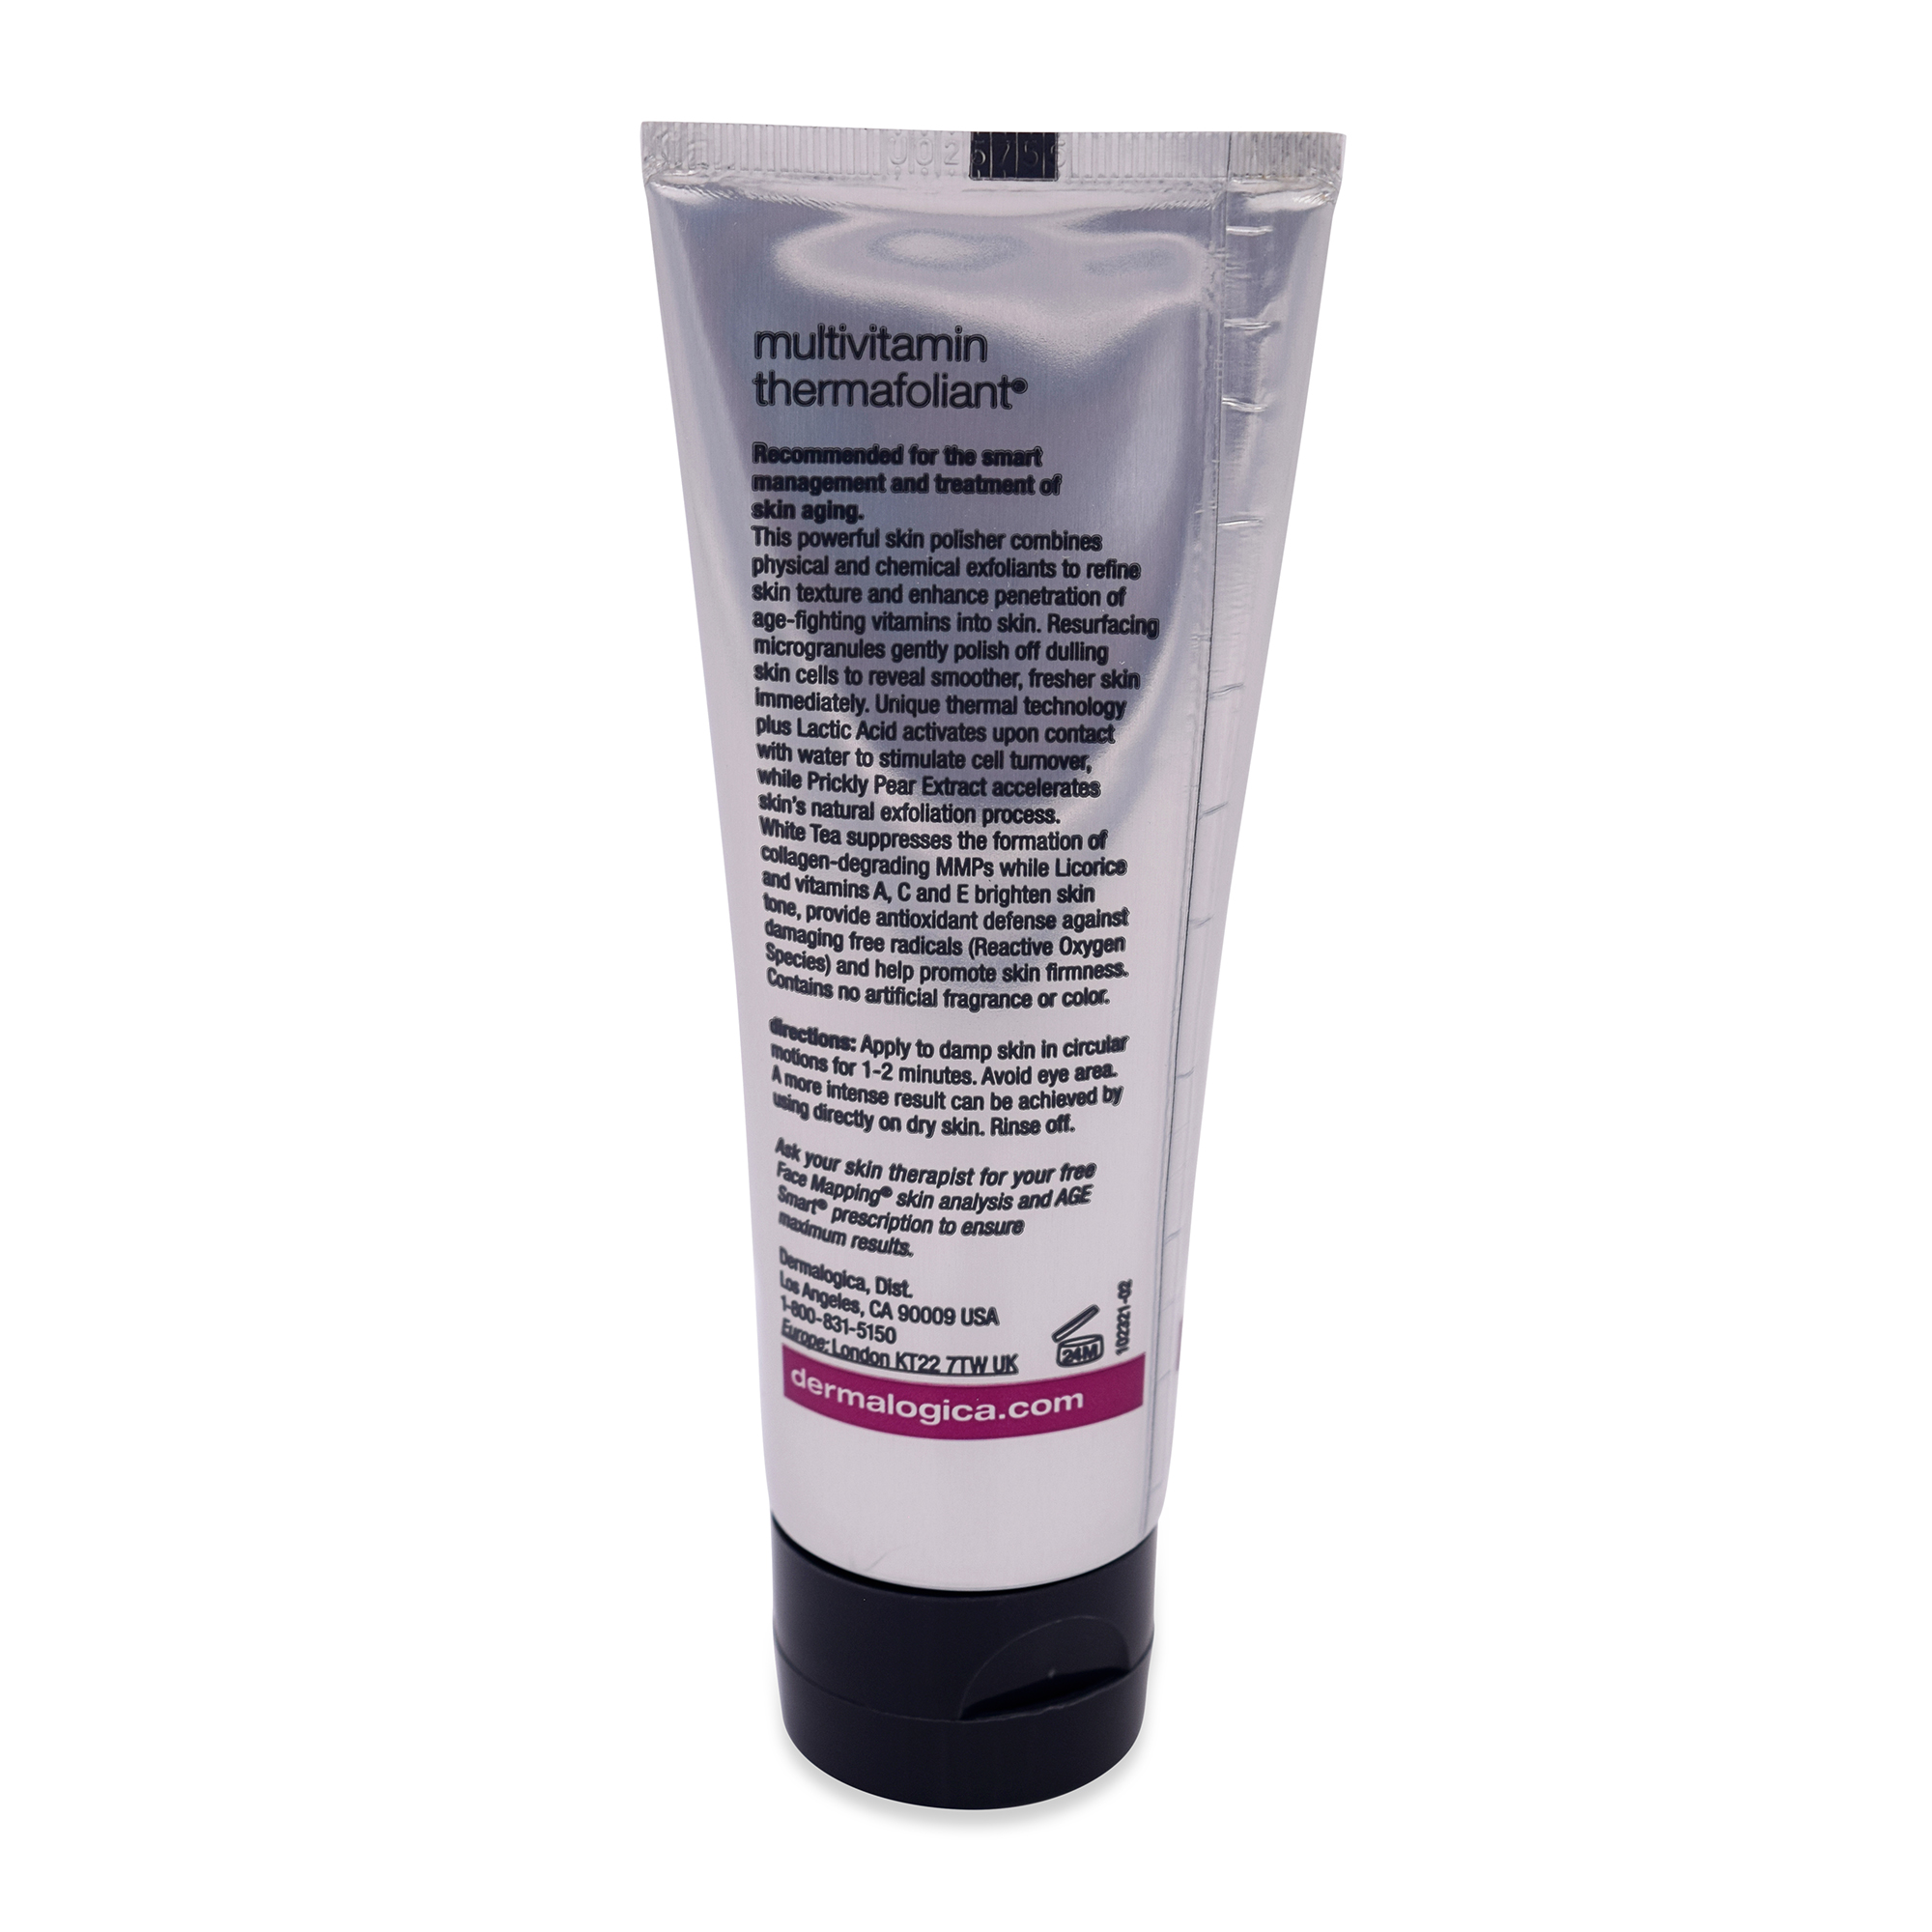 Age Smart Multivitamin Thermafoliant by Dermalogica for Unisex - 2.5 oz Scrub - image 2 of 5